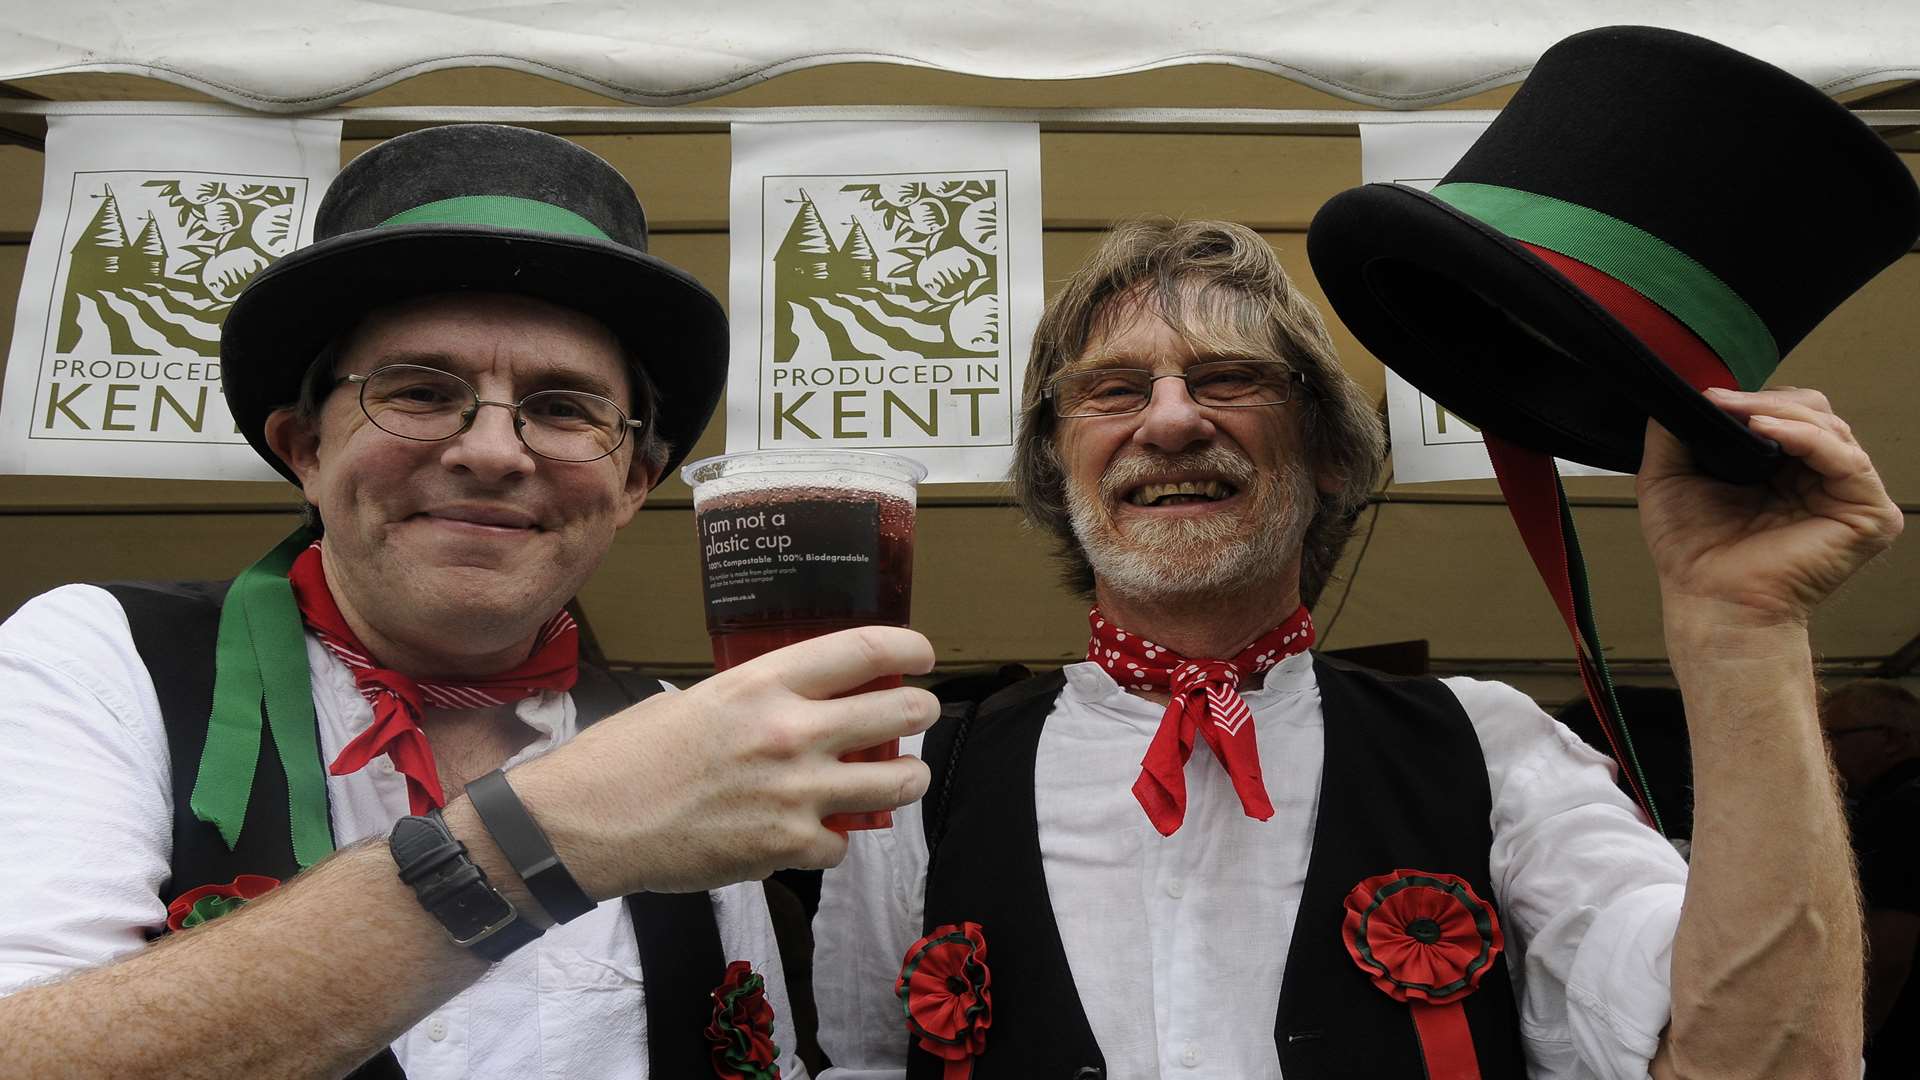 Raising a glass and a hat to the Canterbury Food and Drink Festival